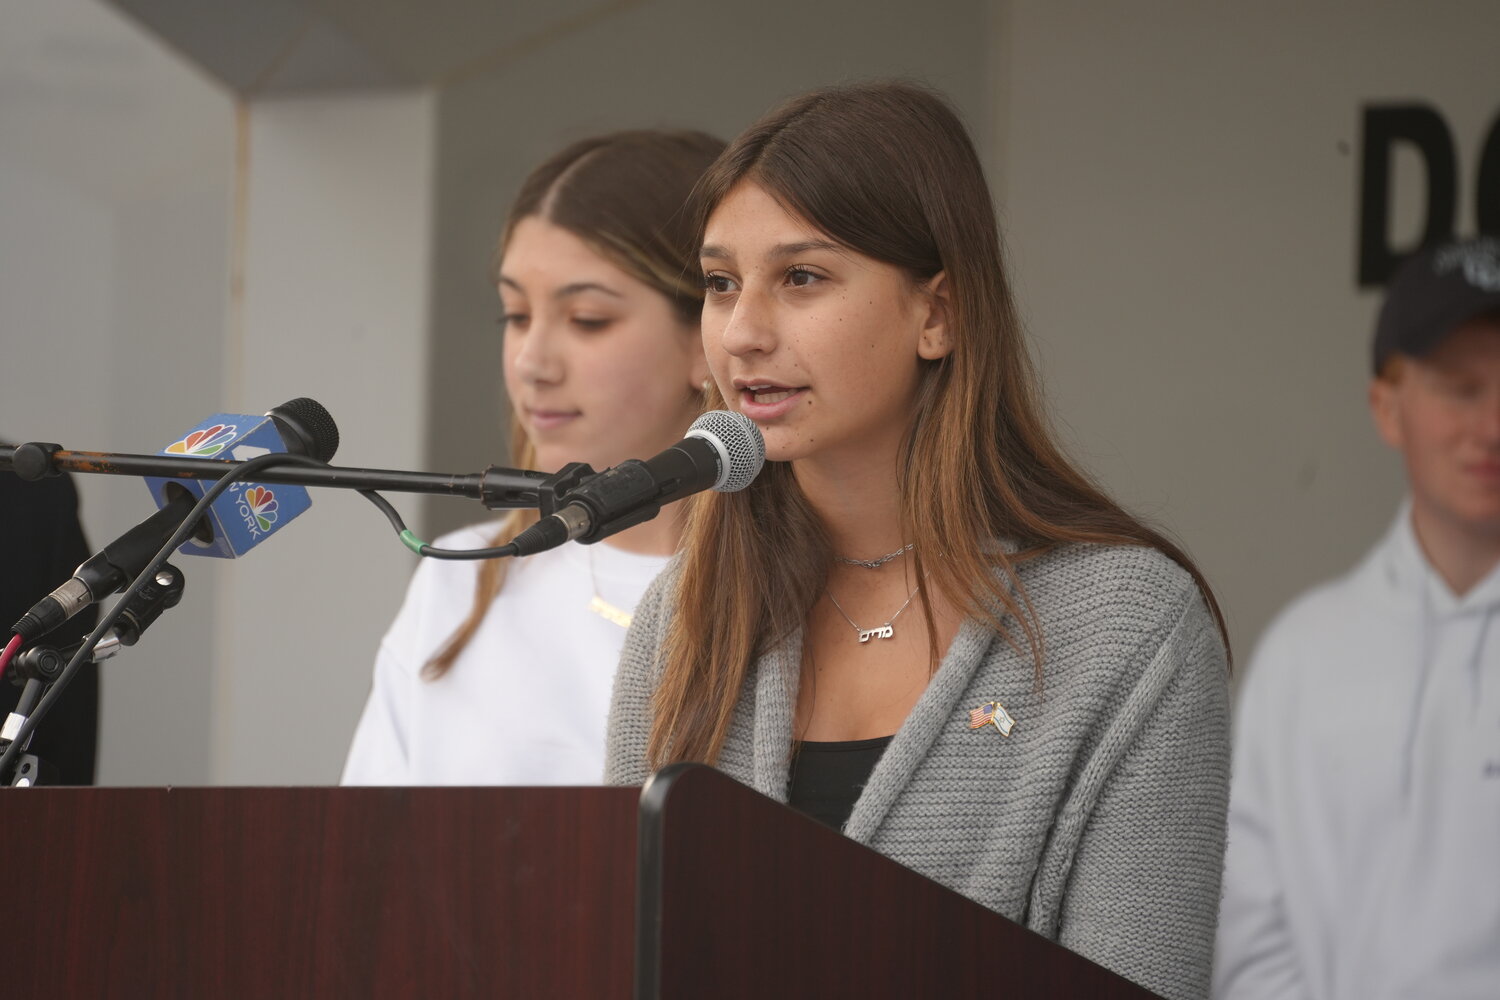 Madison Lange, a John F. Kennedy High School student, spoke about her recent travels to Israel, and about why the war feels personal to Jews around the world.